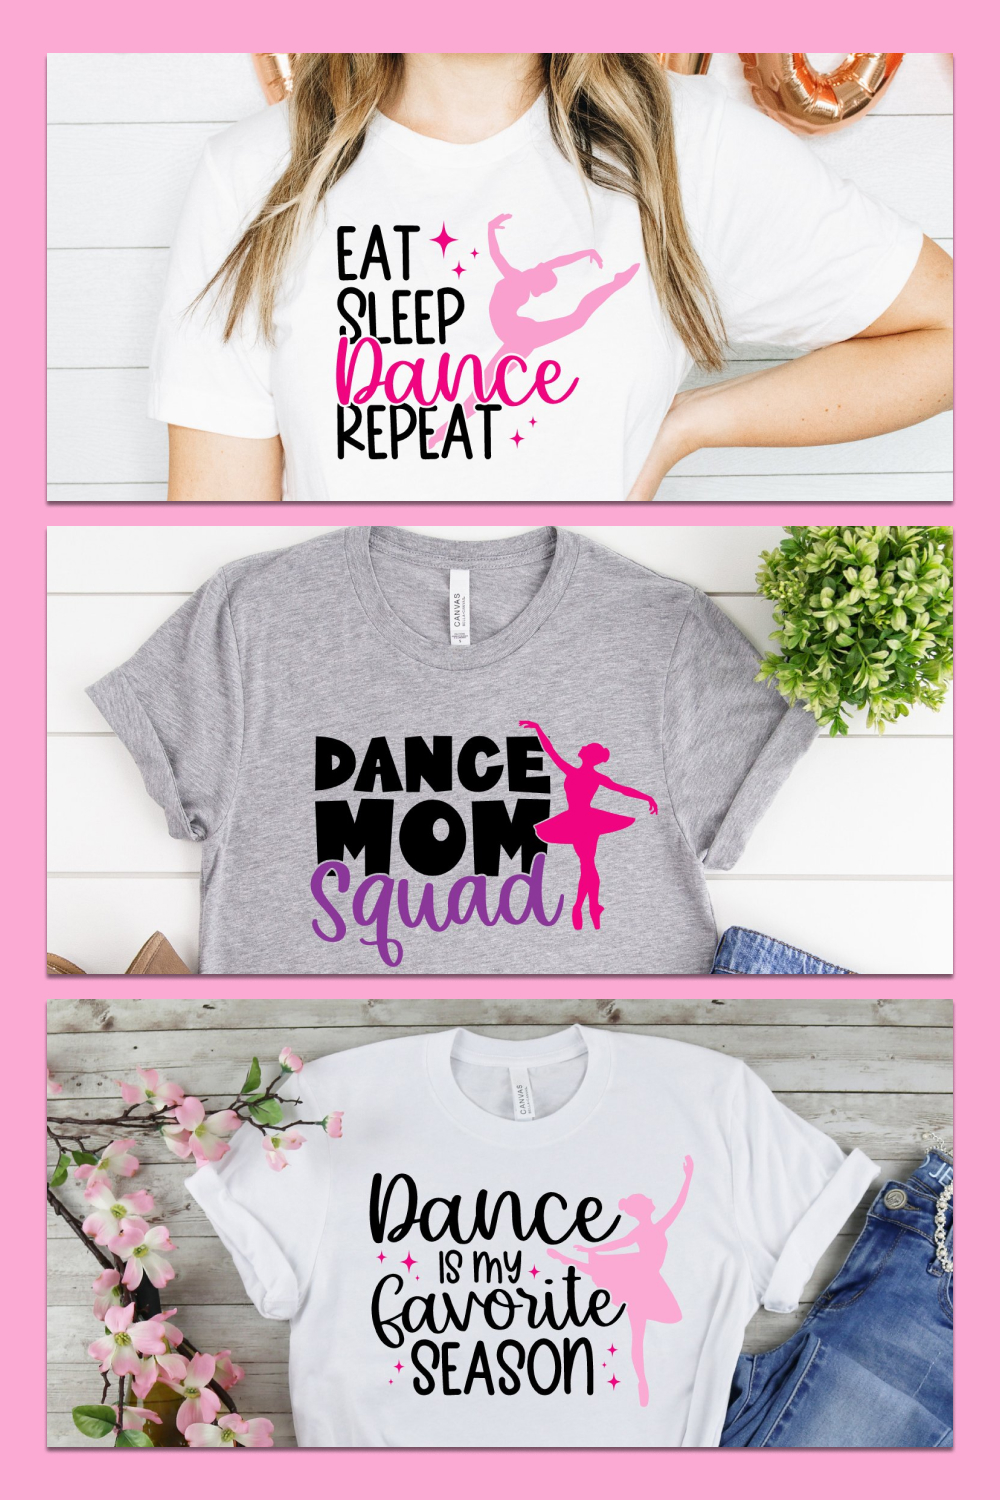 Great inscriptions and ballet images on the t-shirt.